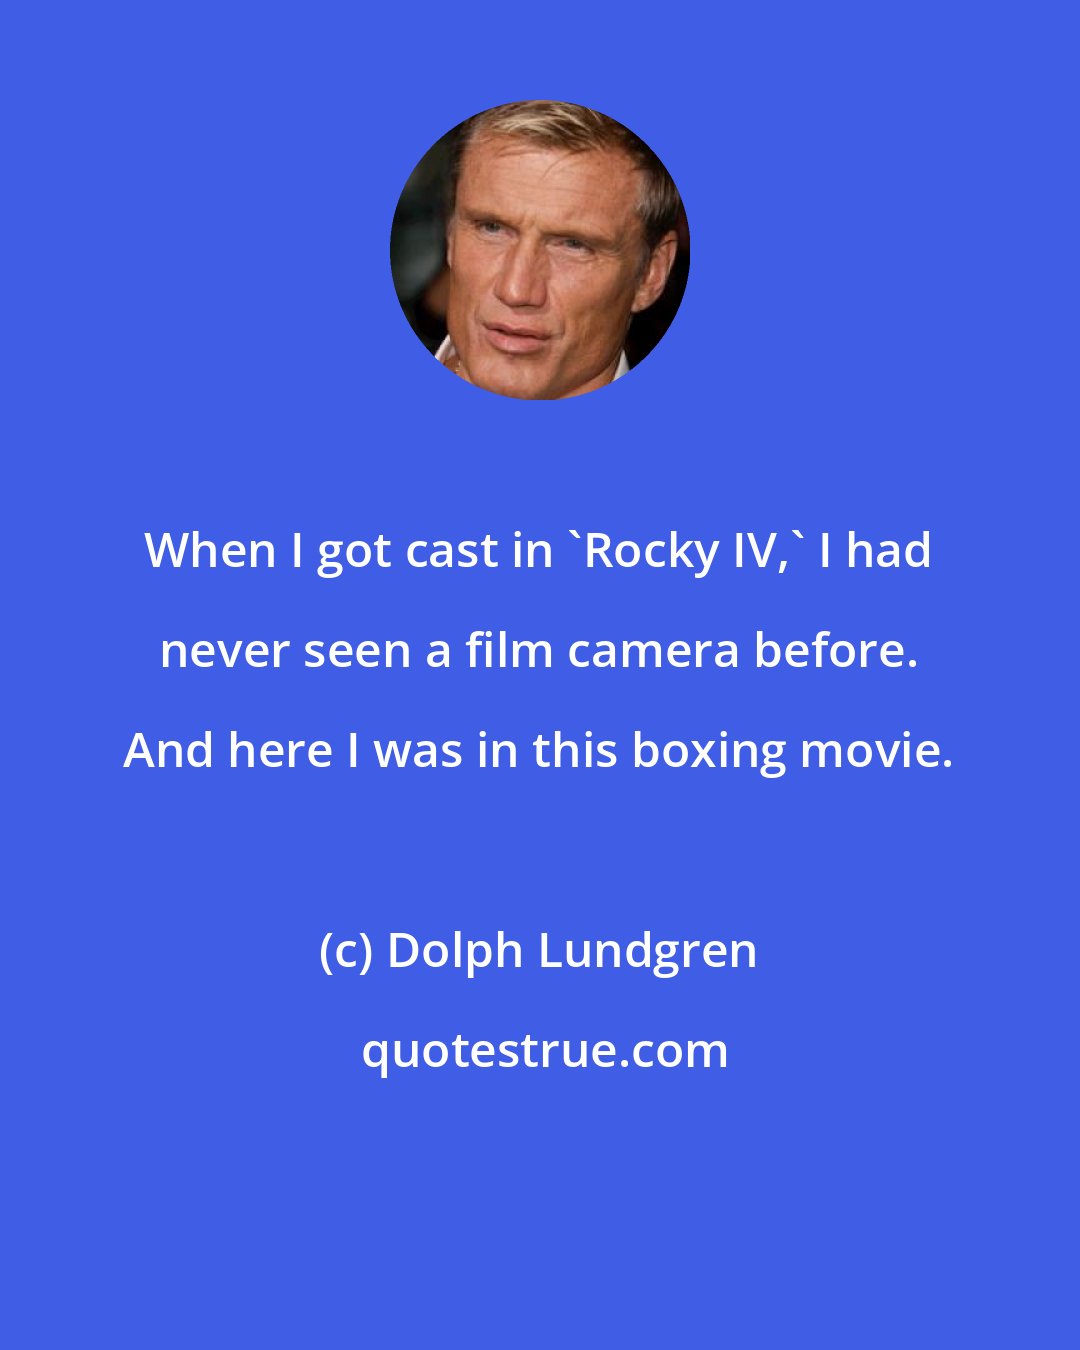 Dolph Lundgren: When I got cast in 'Rocky IV,' I had never seen a film camera before. And here I was in this boxing movie.